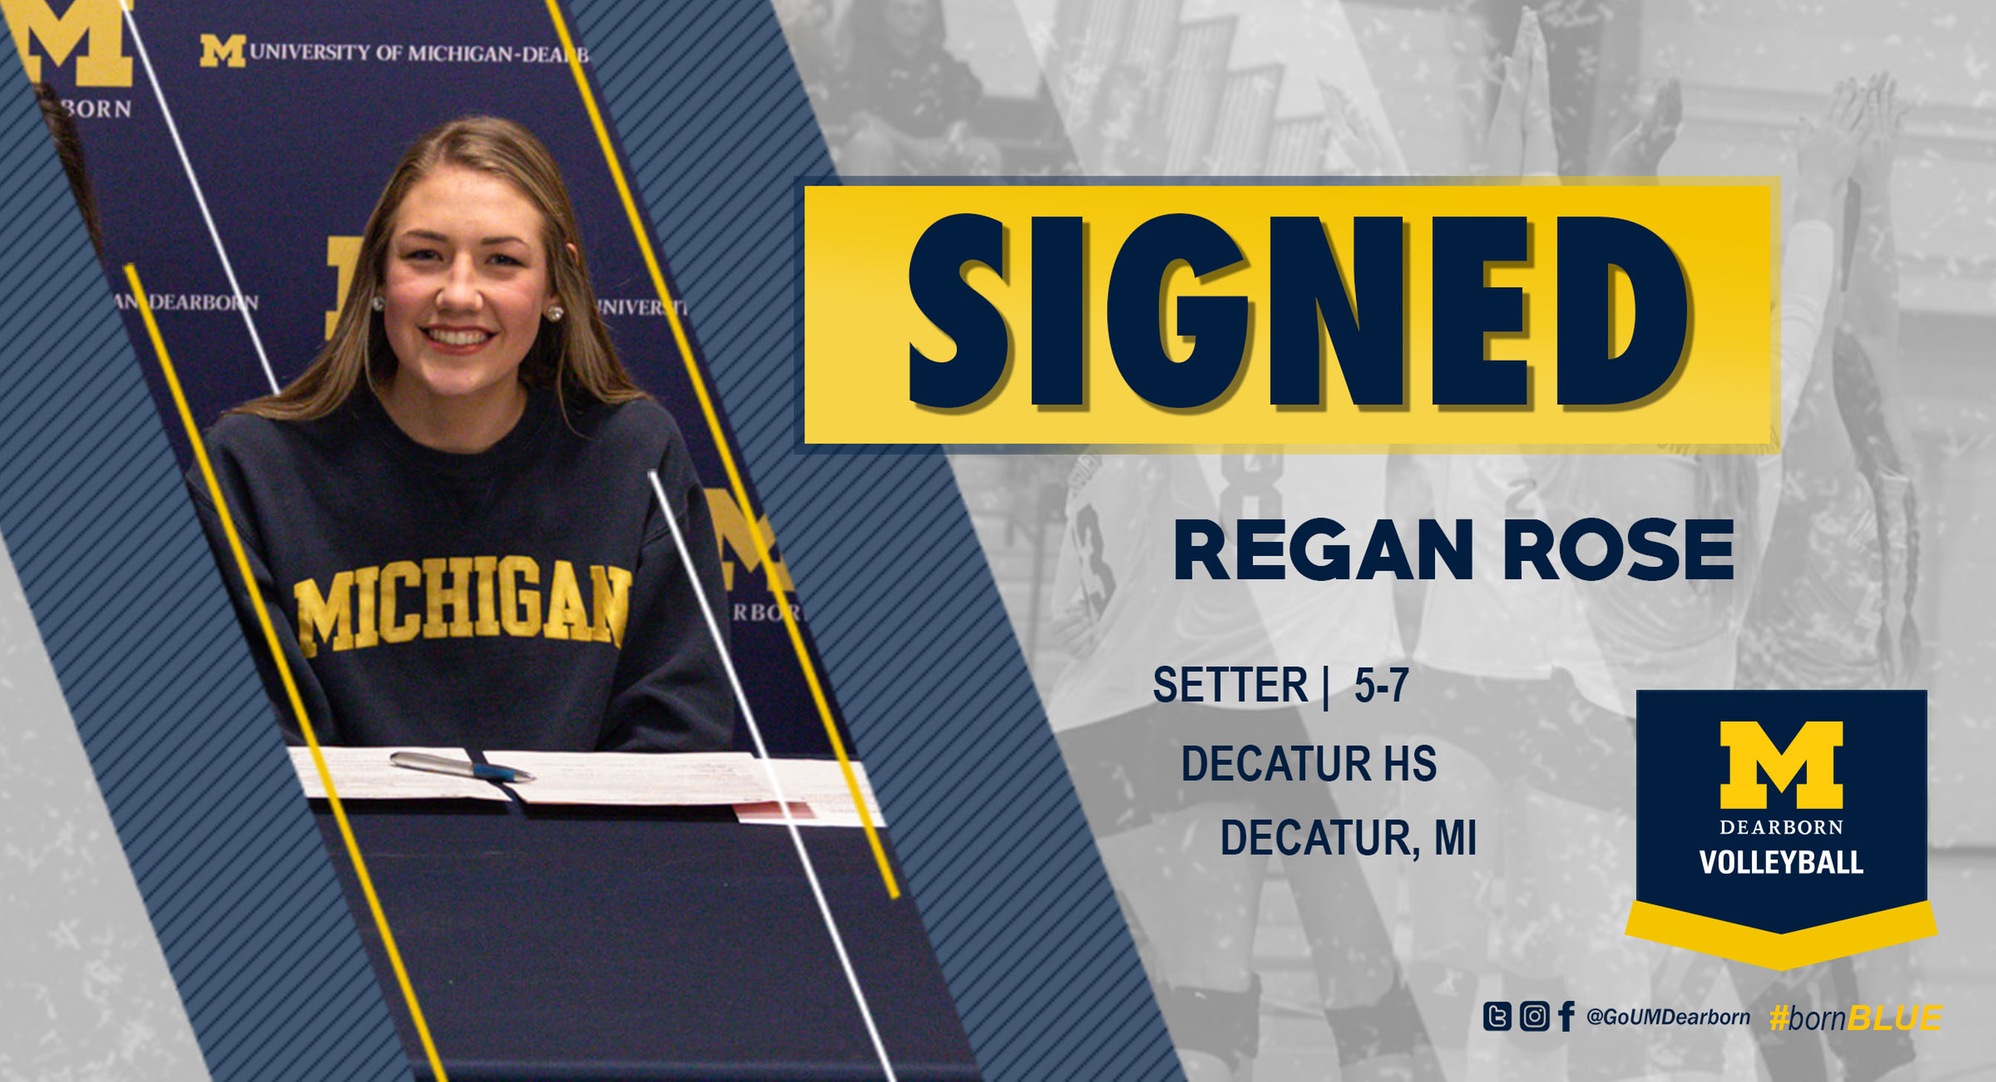 UM-Dearborn Volleyball inks Regan Rose to Class of 2020